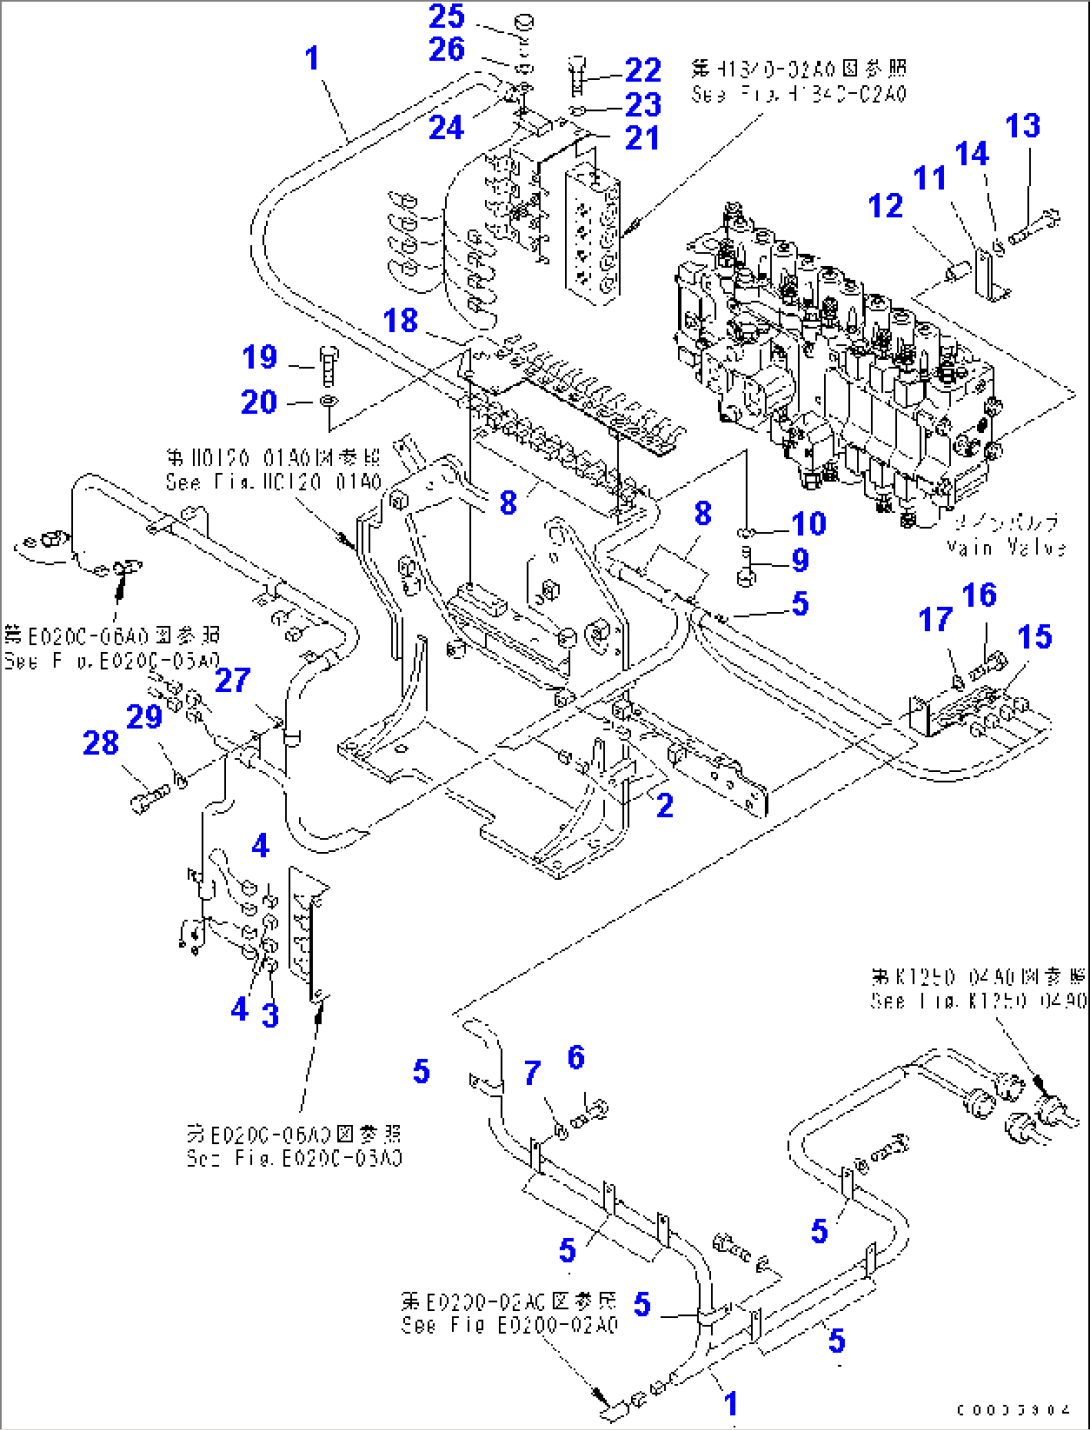 ELECTRICAL SYSTEM (VALVE HARNESS) (HARNESS)(#1001-1005)